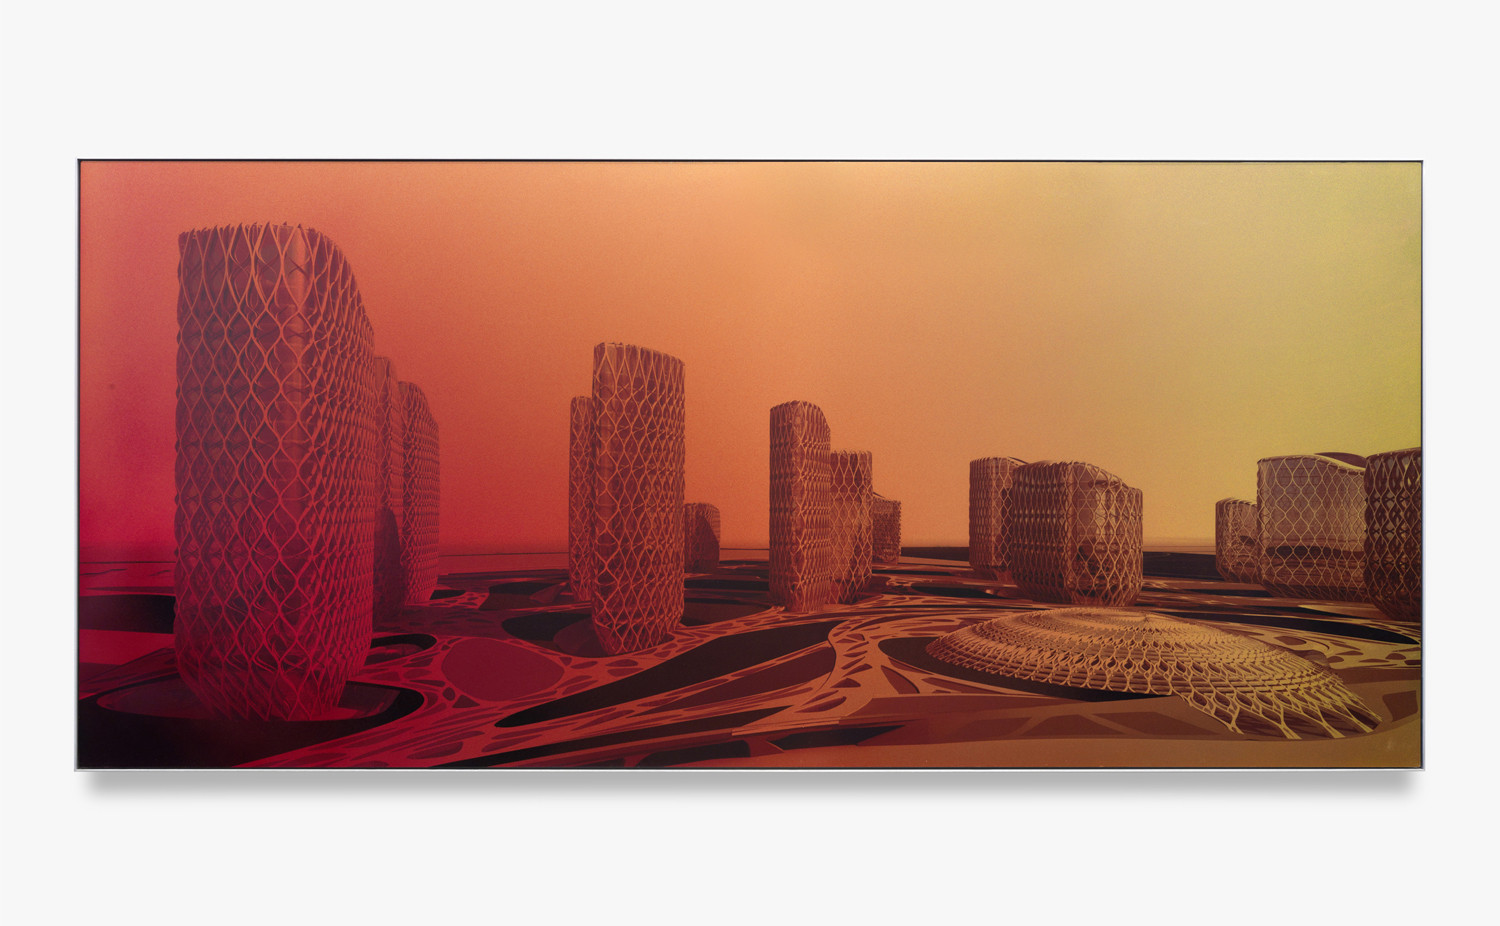 Zaha Hadid, ‘People's Conference Hall, Tripoli’, 2007, Water based automotive paint onto gelatine and chrome-polyester, varnished with UV resistance polymer, mounted on DIBOND